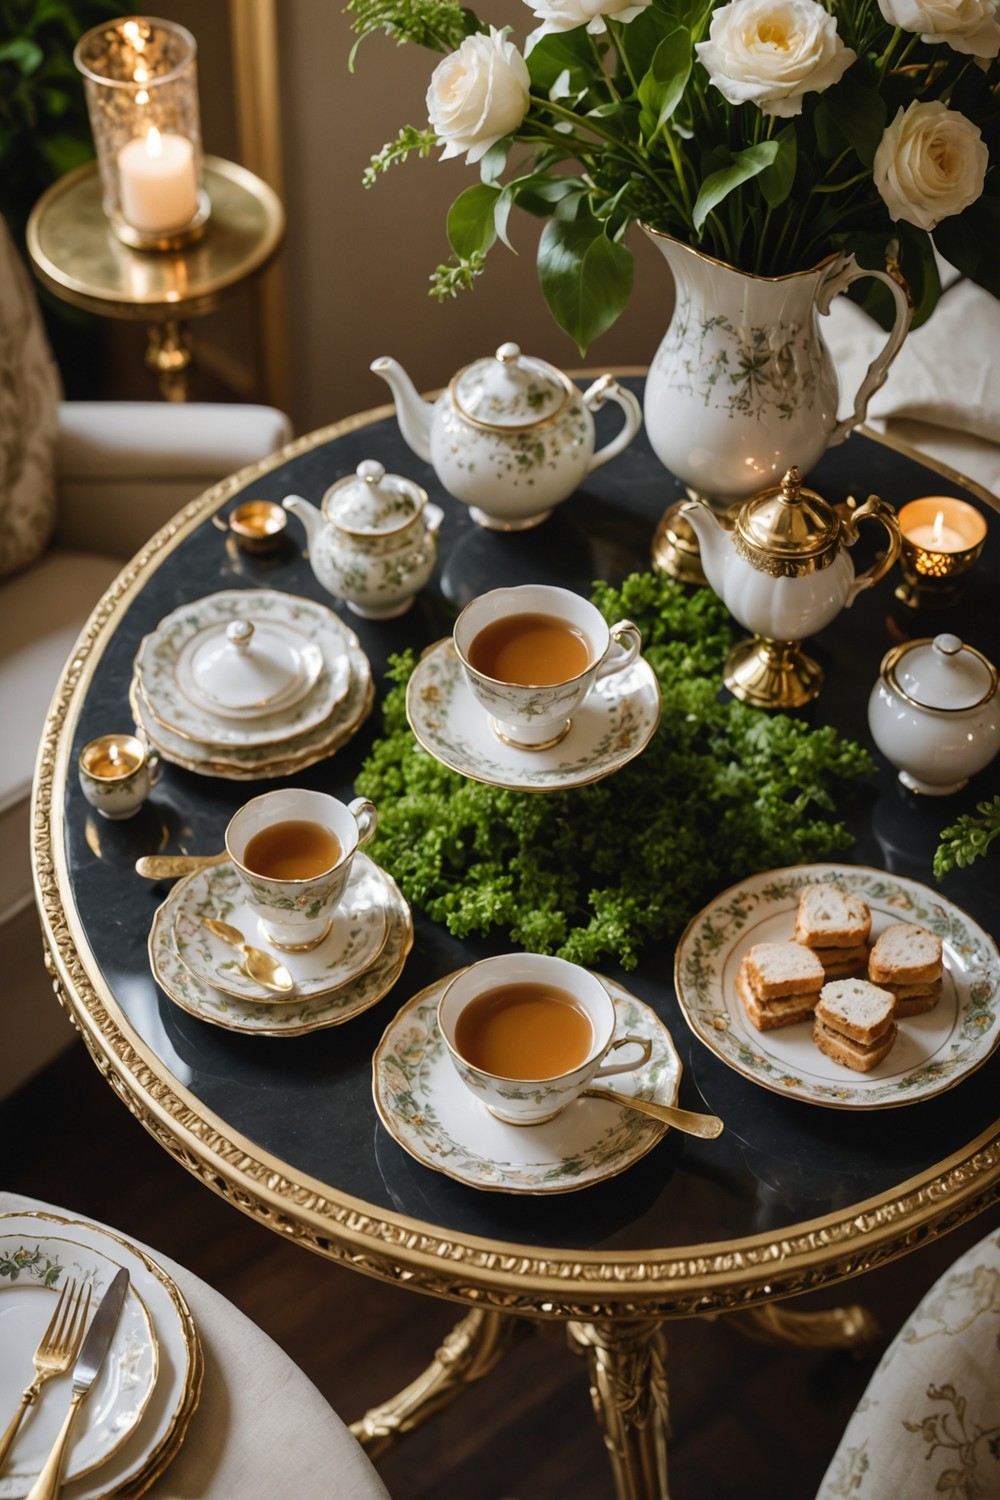 Delicate China and Dainty Decor: Inspired by Lady Whistledown's Teacups